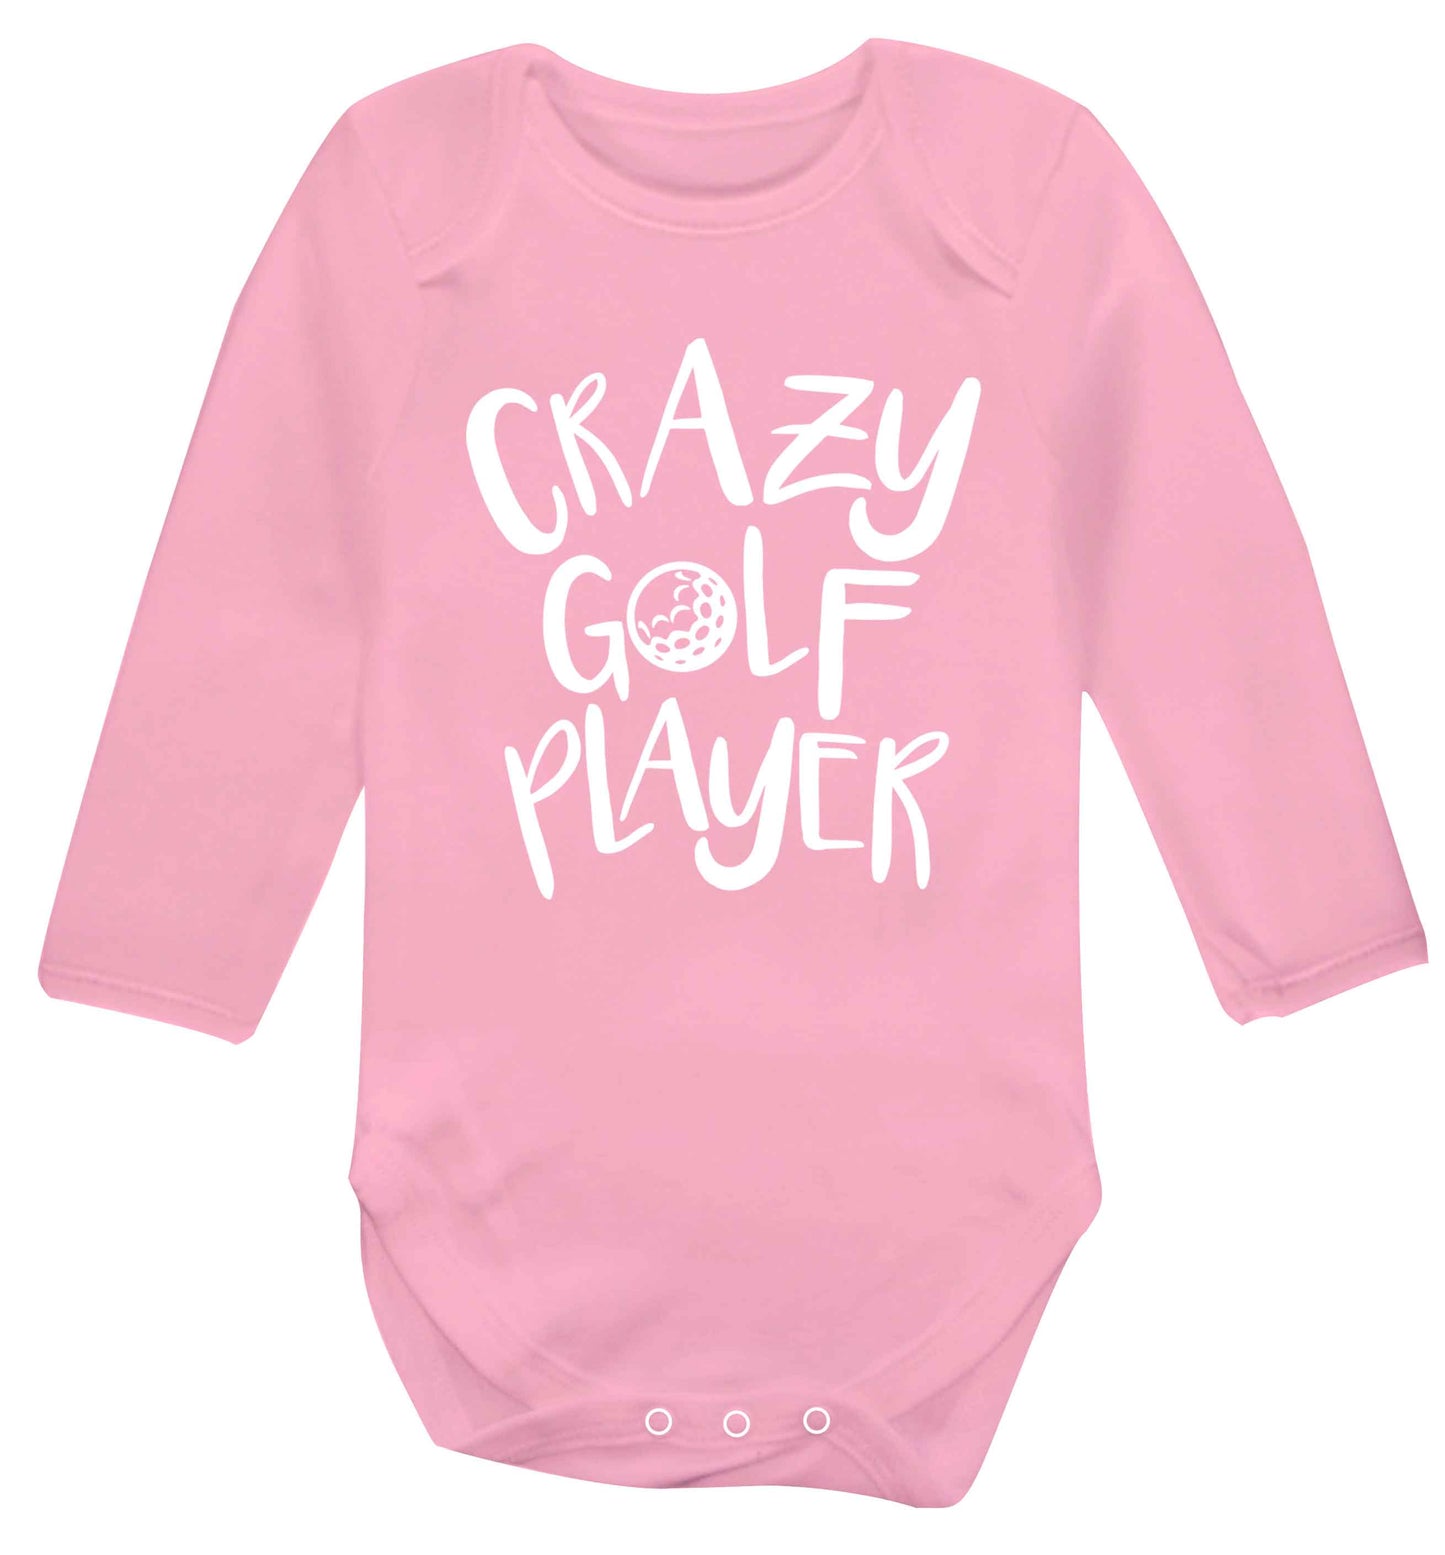 Crazy golf player Baby Vest long sleeved pale pink 6-12 months